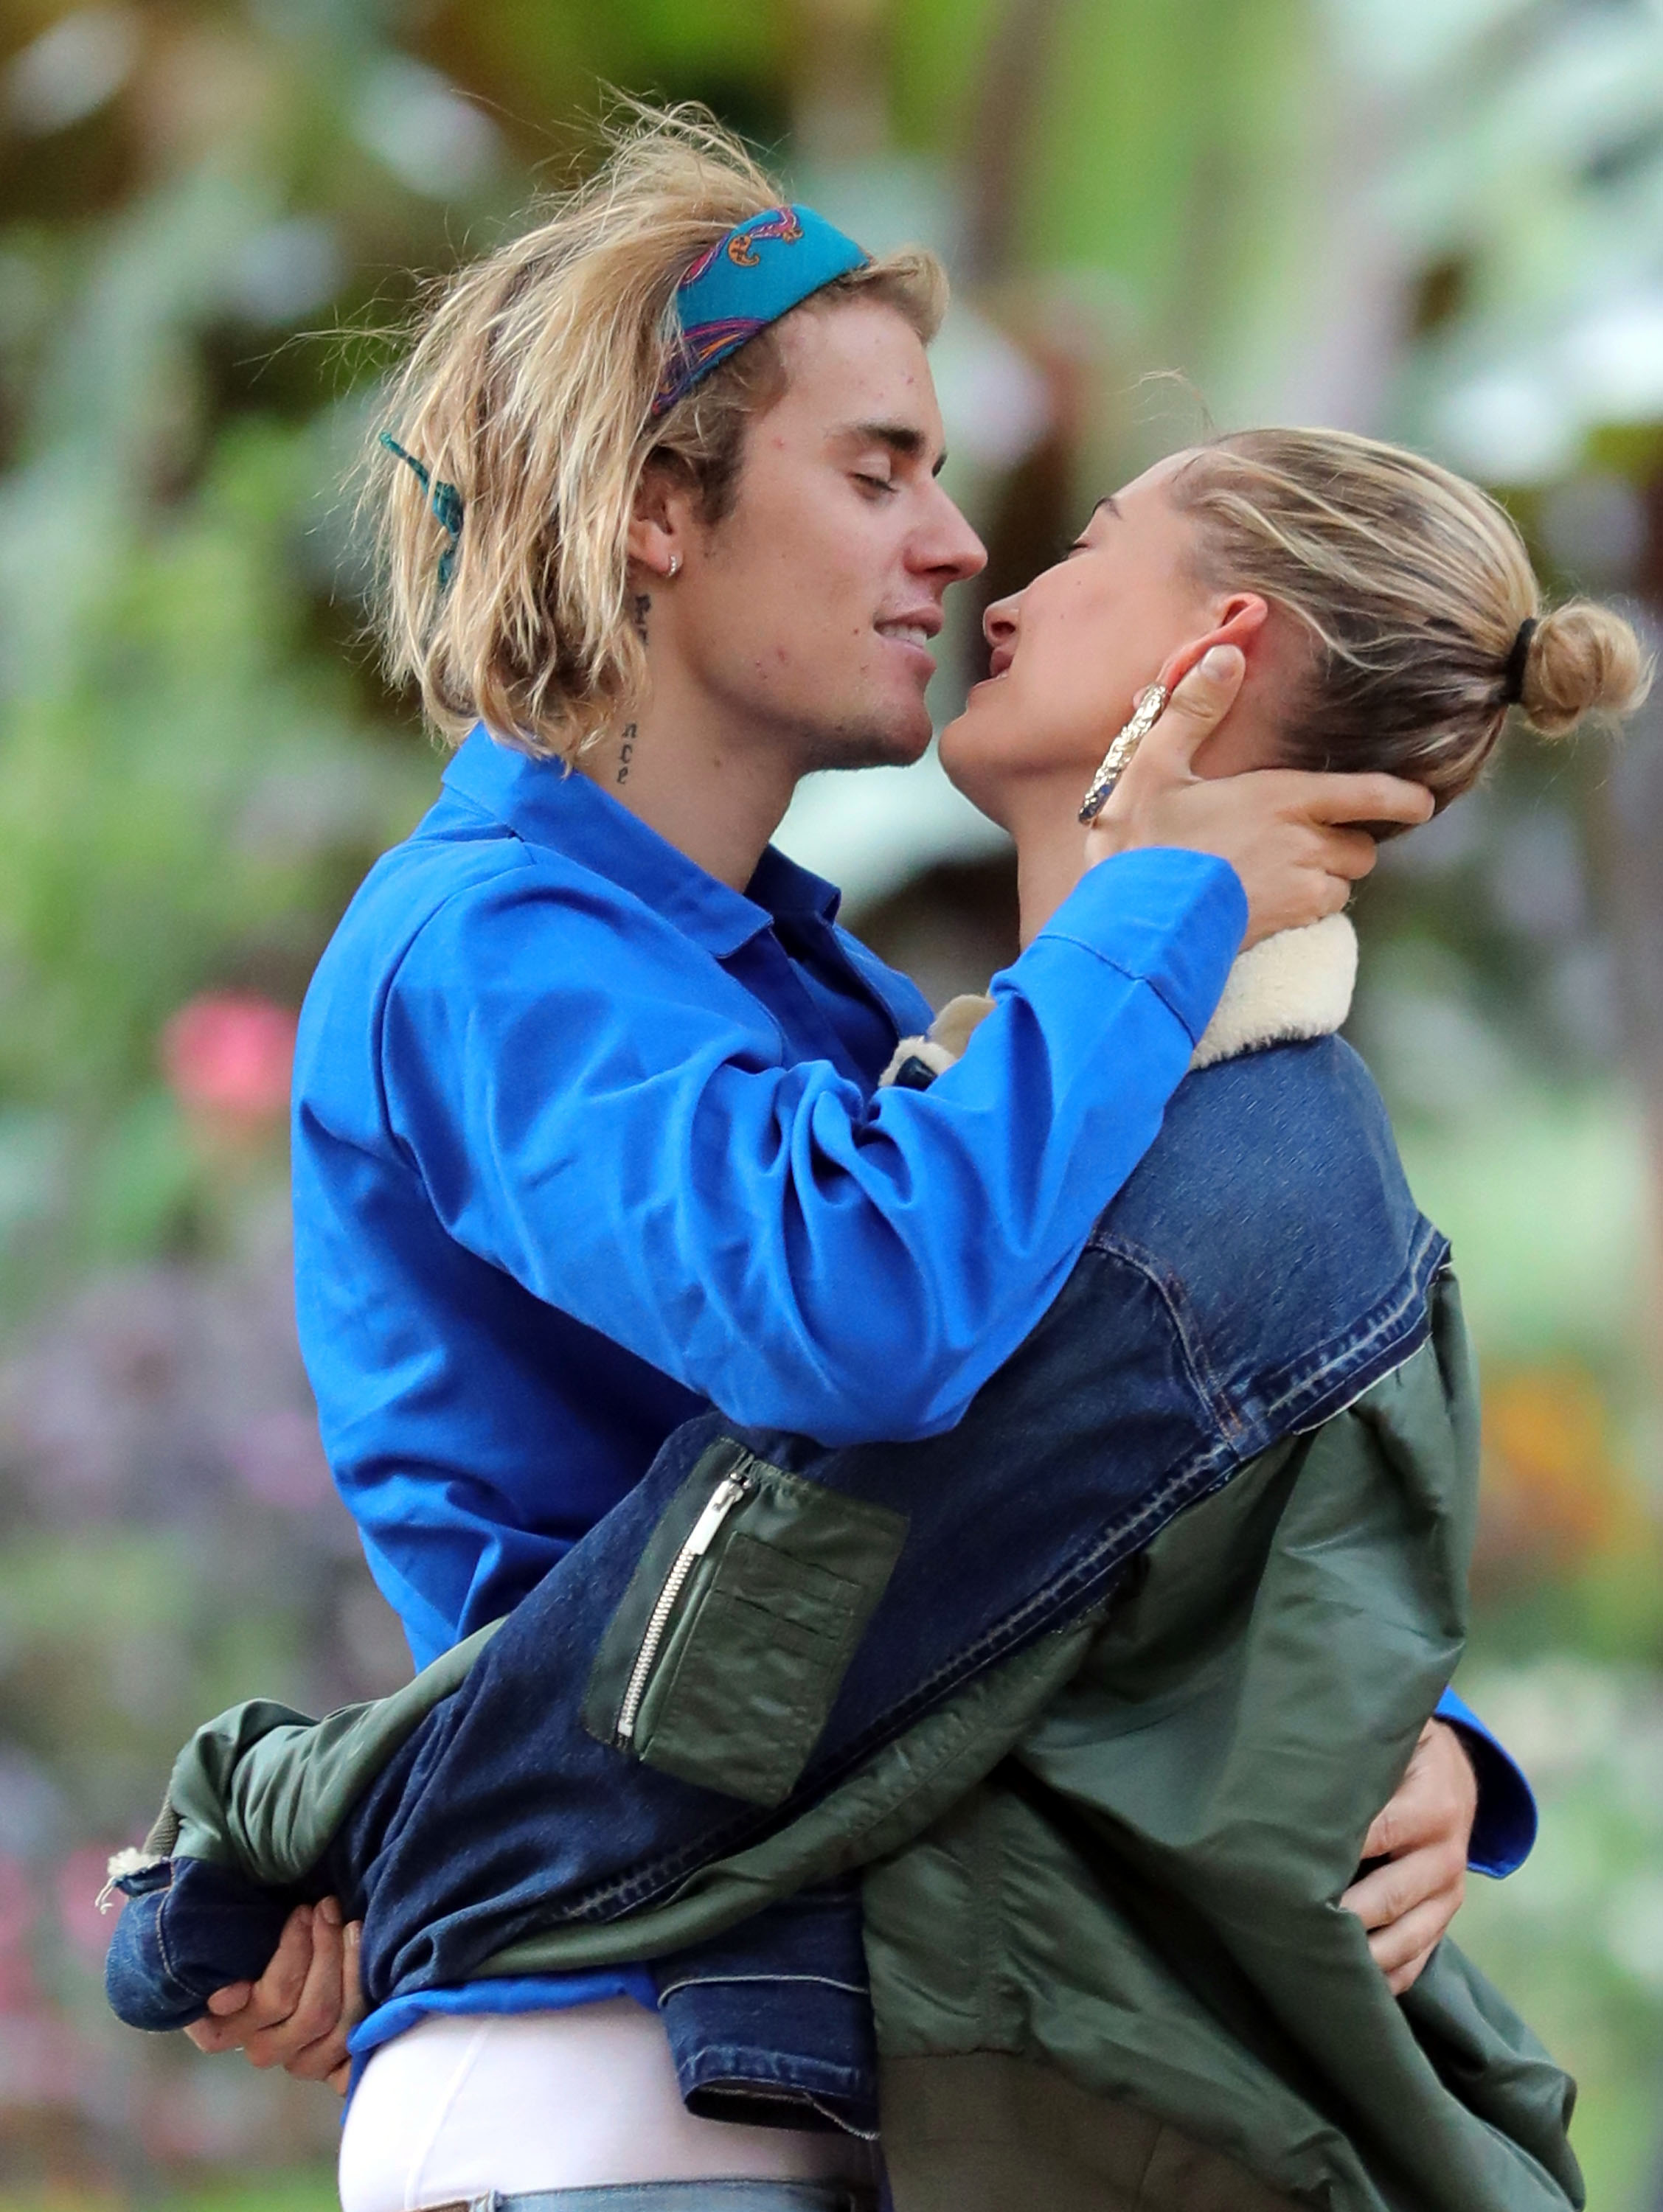 Justin Bieber and Hailey Baldwin on September 17, 2018 in London, England | Source: Getty Images